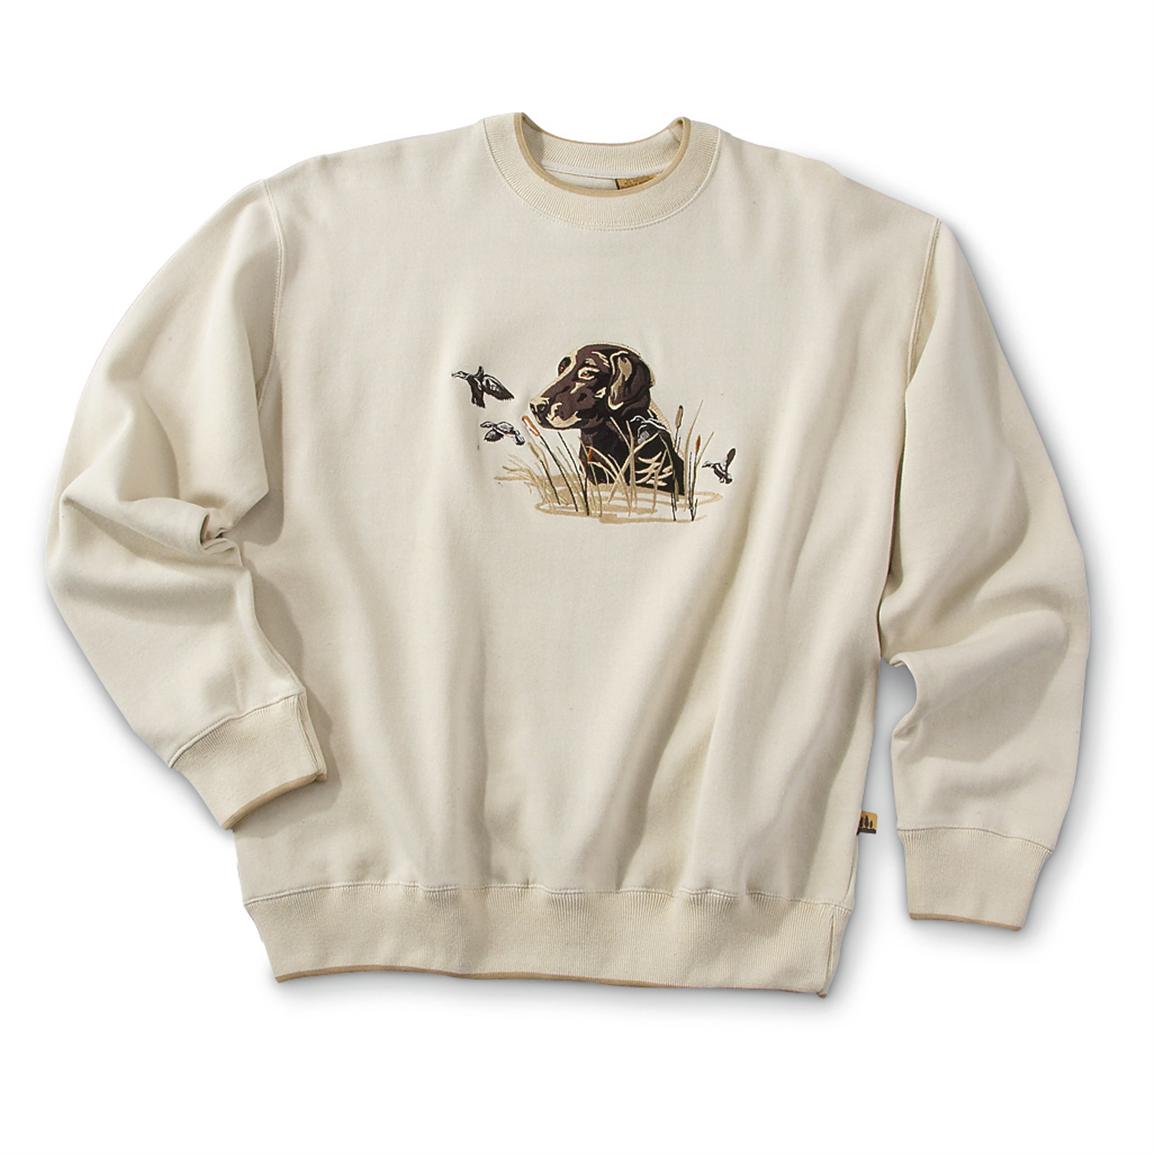 Parity Mens Embroidered Wildlife Sweatshirts Up To 79 Off [ 1154 x 1154 Pixel ]